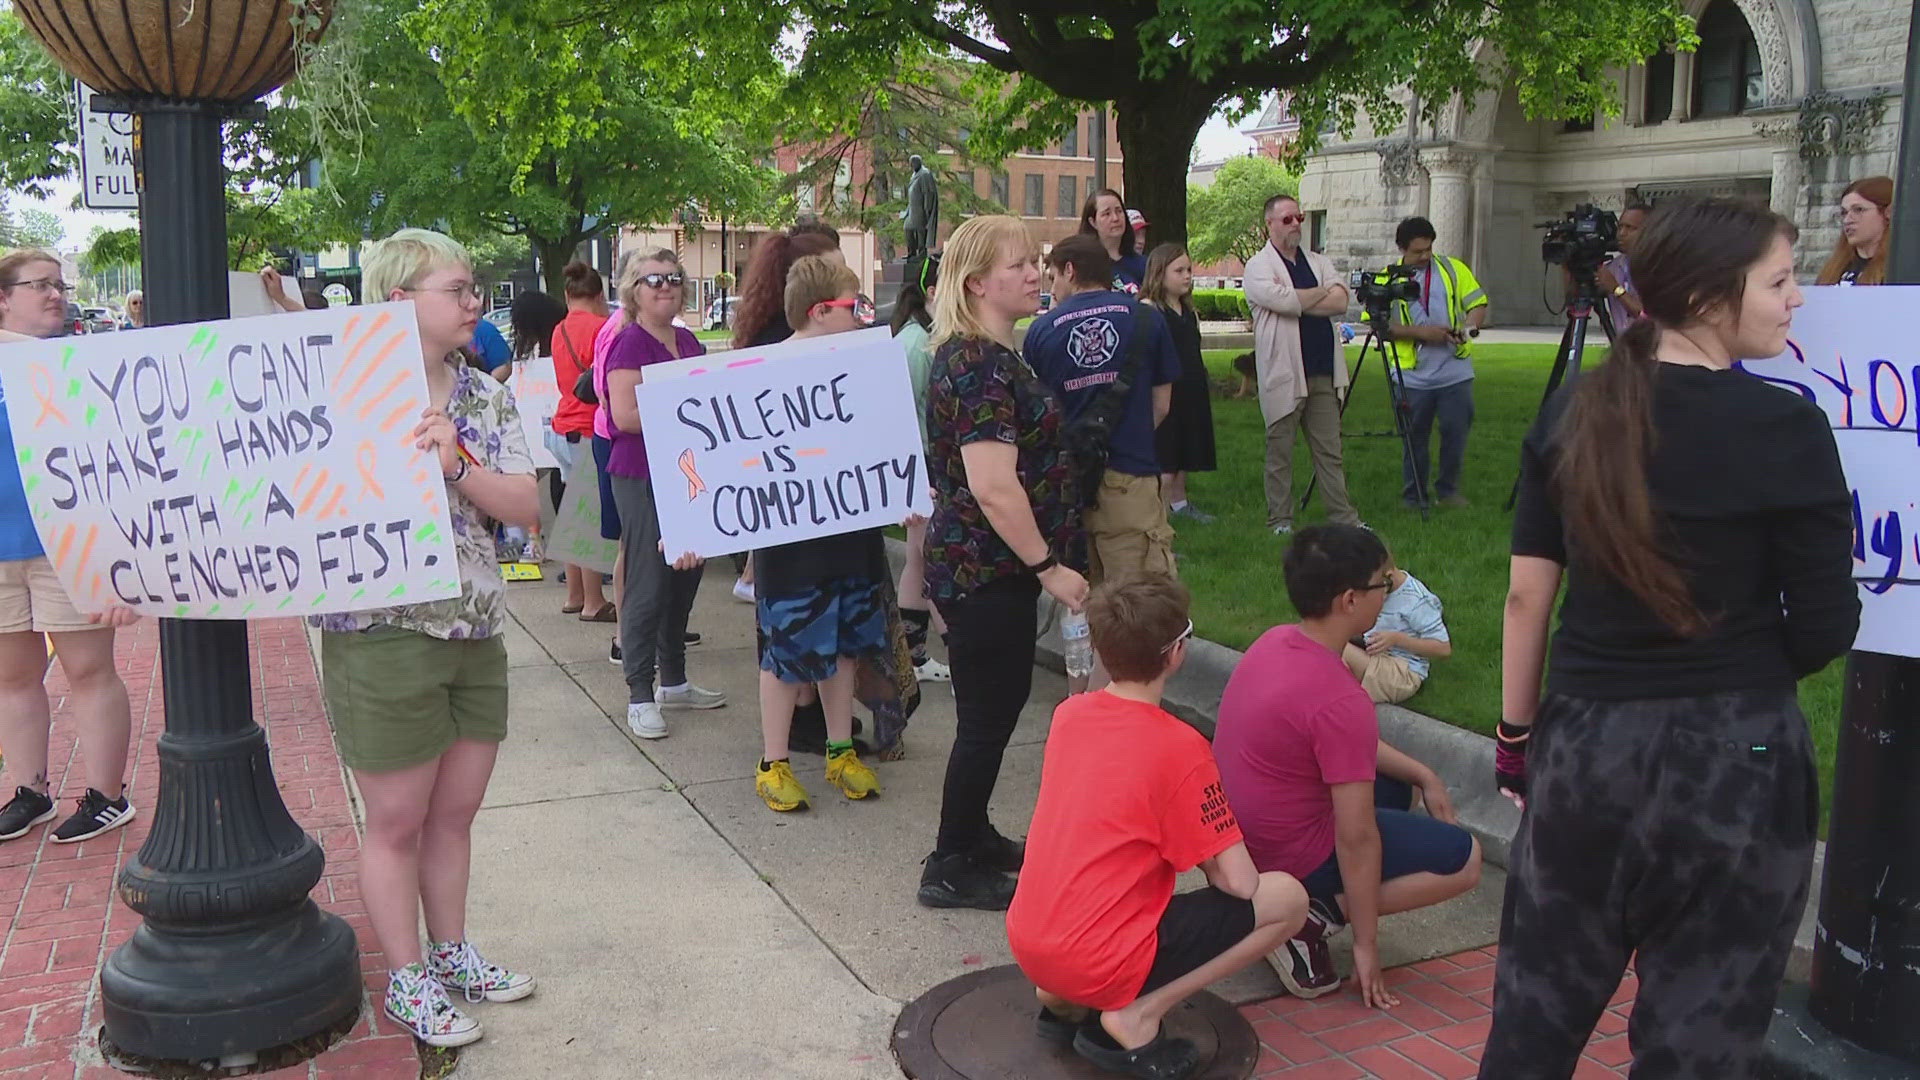 The anti-bullying demonstration included a walk from Greenfield Central High School to the courthouse.